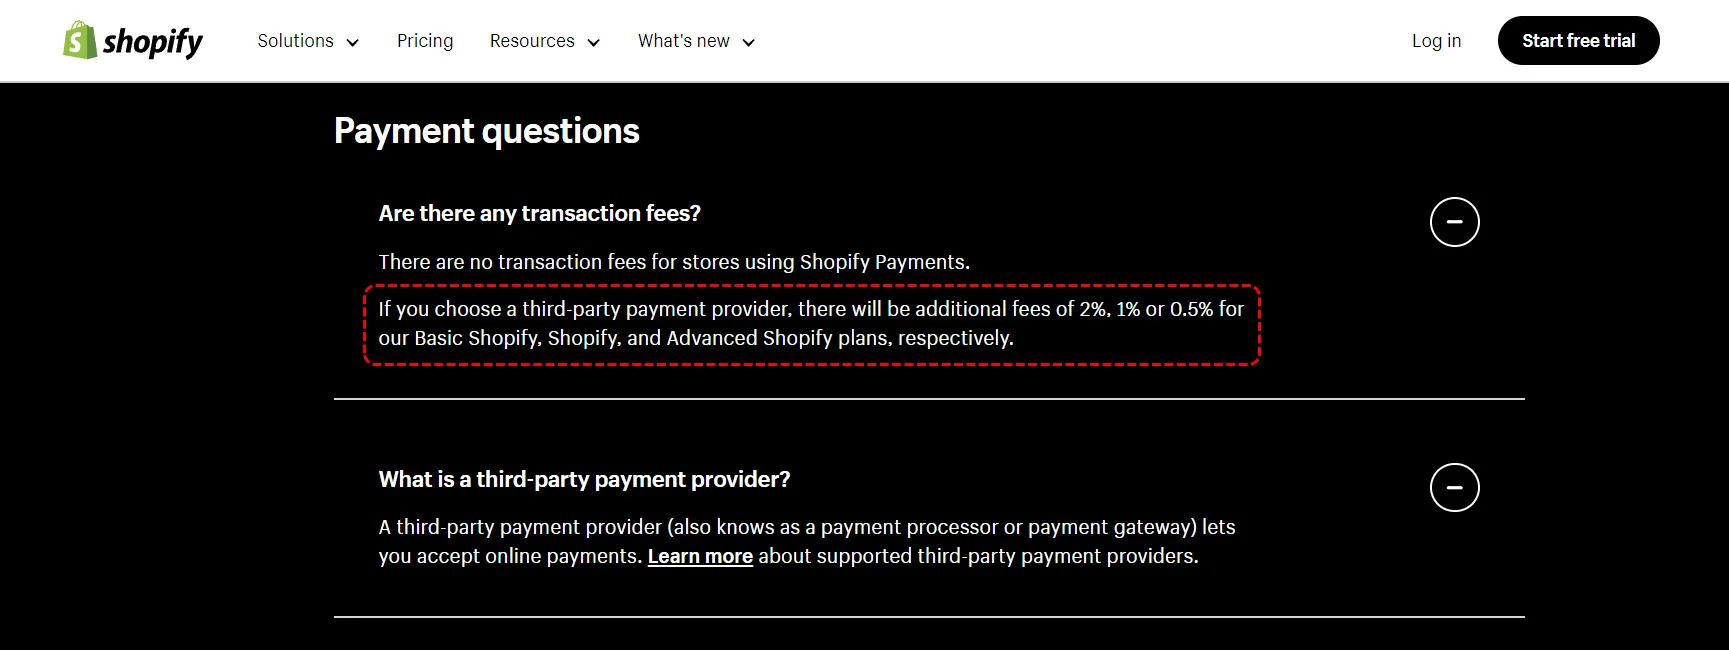 shopify third-party transaction fees for all plans